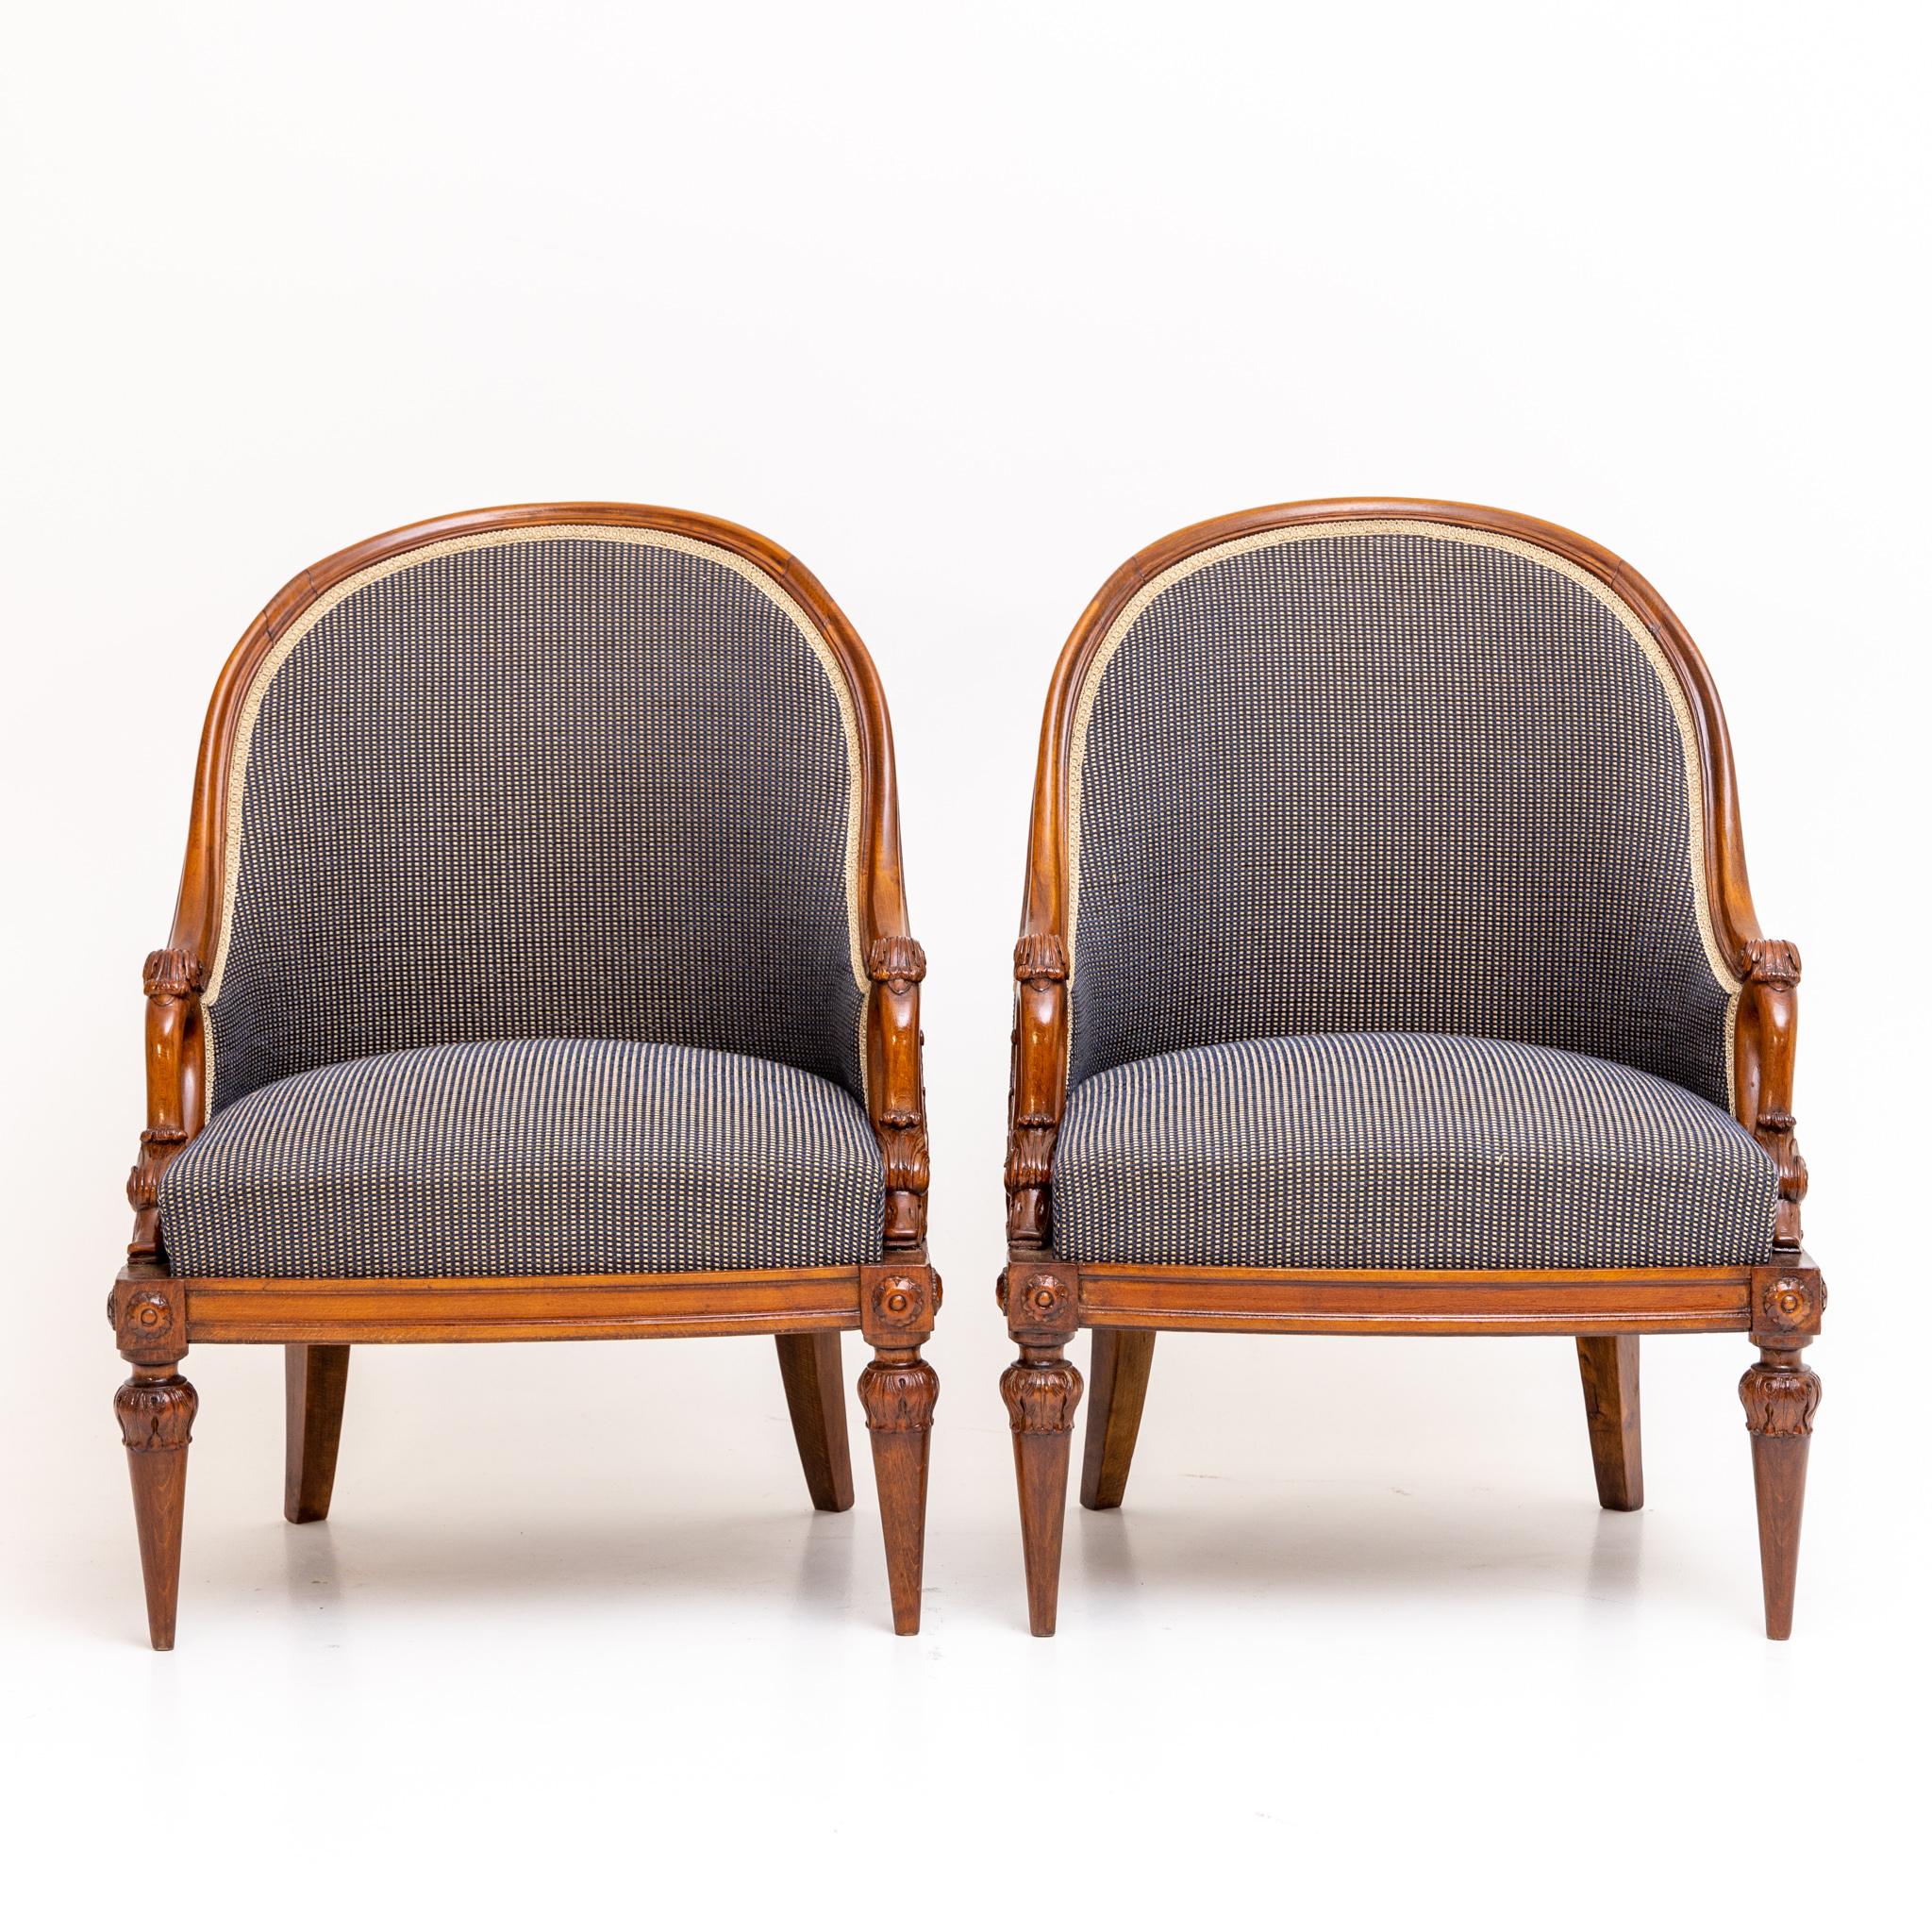 Pair of Empire style bergeren with carved swan necks as armrests and high rounded backs. The bergeren are newly upholstered and covered.